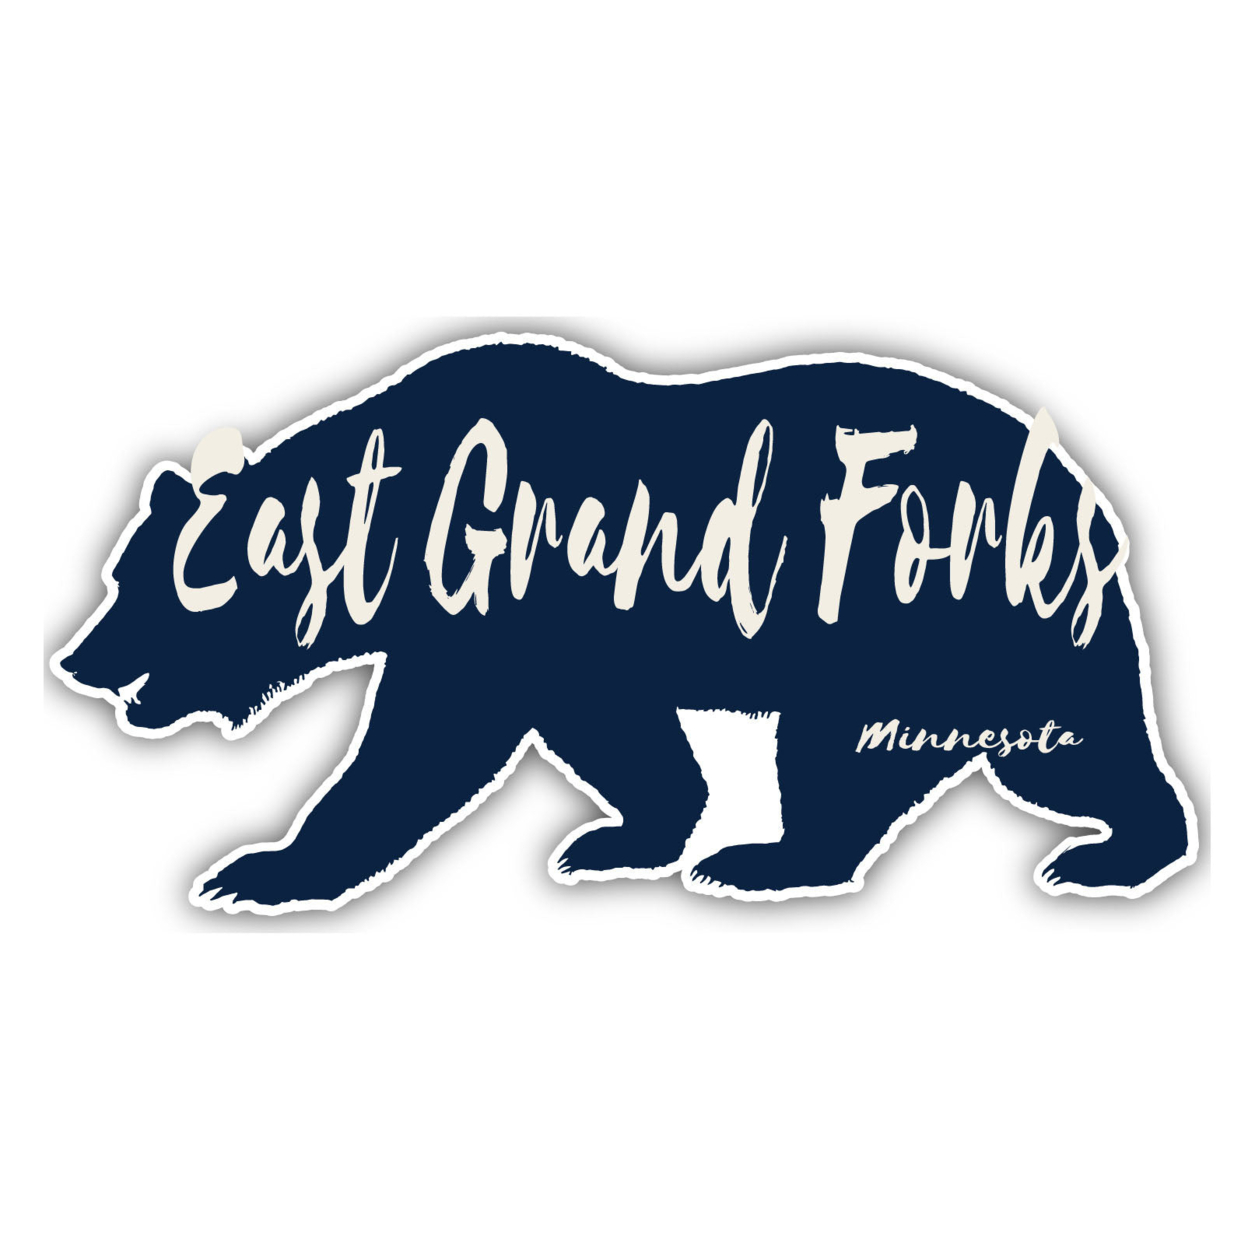 East Grand Forks Minnesota Souvenir Decorative Stickers (Choose Theme And Size) - 4-Pack, 10-Inch, Bear